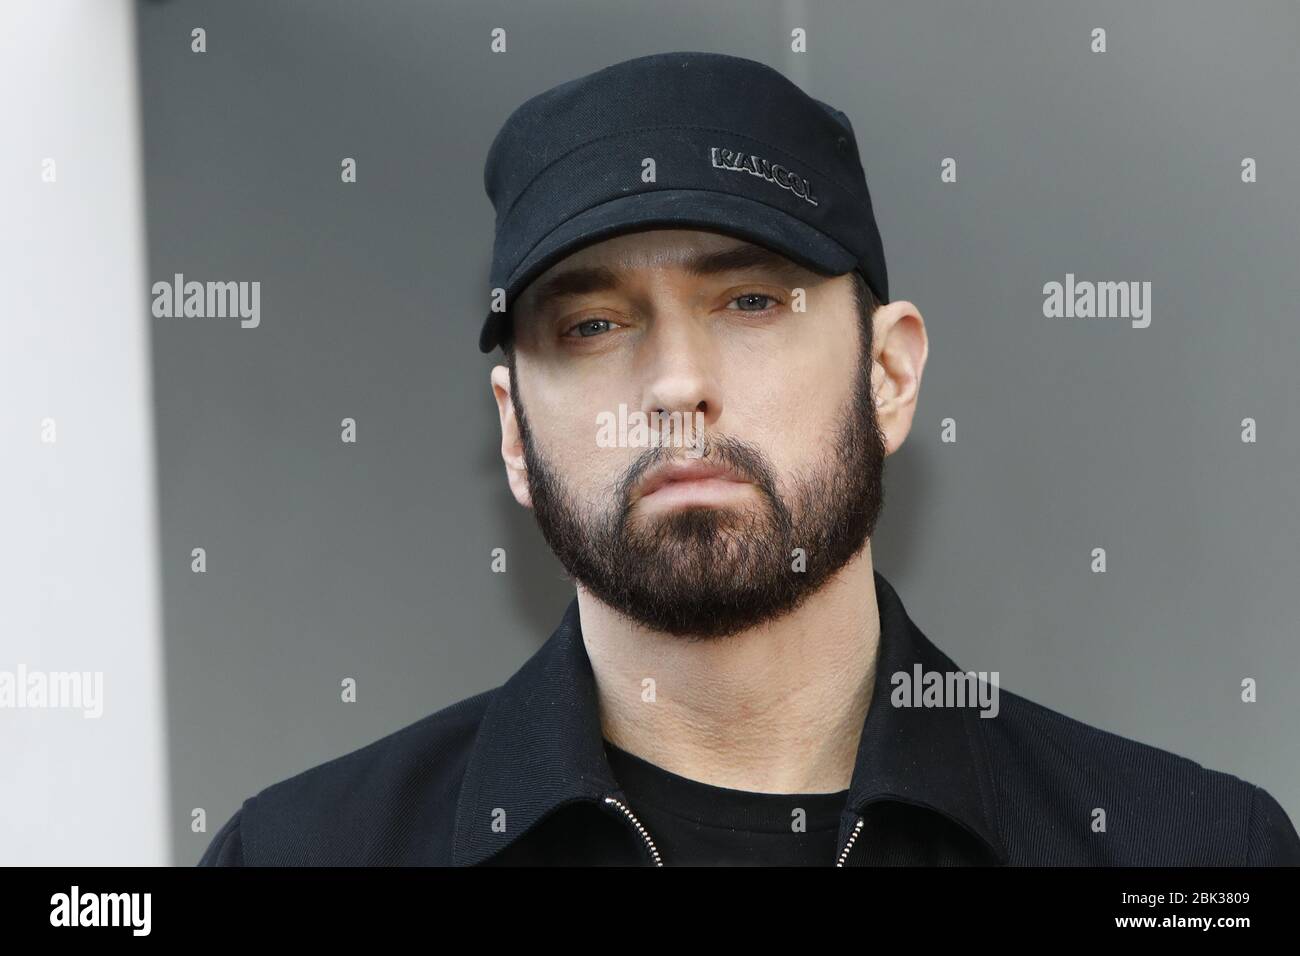 MAY 01, 2020: FILE: EMINEM came face-to-face with an intruder who bypassed security at his Detroit home. The suspect was identified as 27-year-old Matthew David Hughes. PICTURED: January 30, 2020, Los Angeles, CA, USA:  Eminem, Marshall Bruce Mathers III at the 50 Cent Star Ceremony on the Hollywood Walk of Fame on January 30, 2019 in Los Angeles, CA (Credit Image: © Kay Blake/ZUMA Wire) Stock Photo